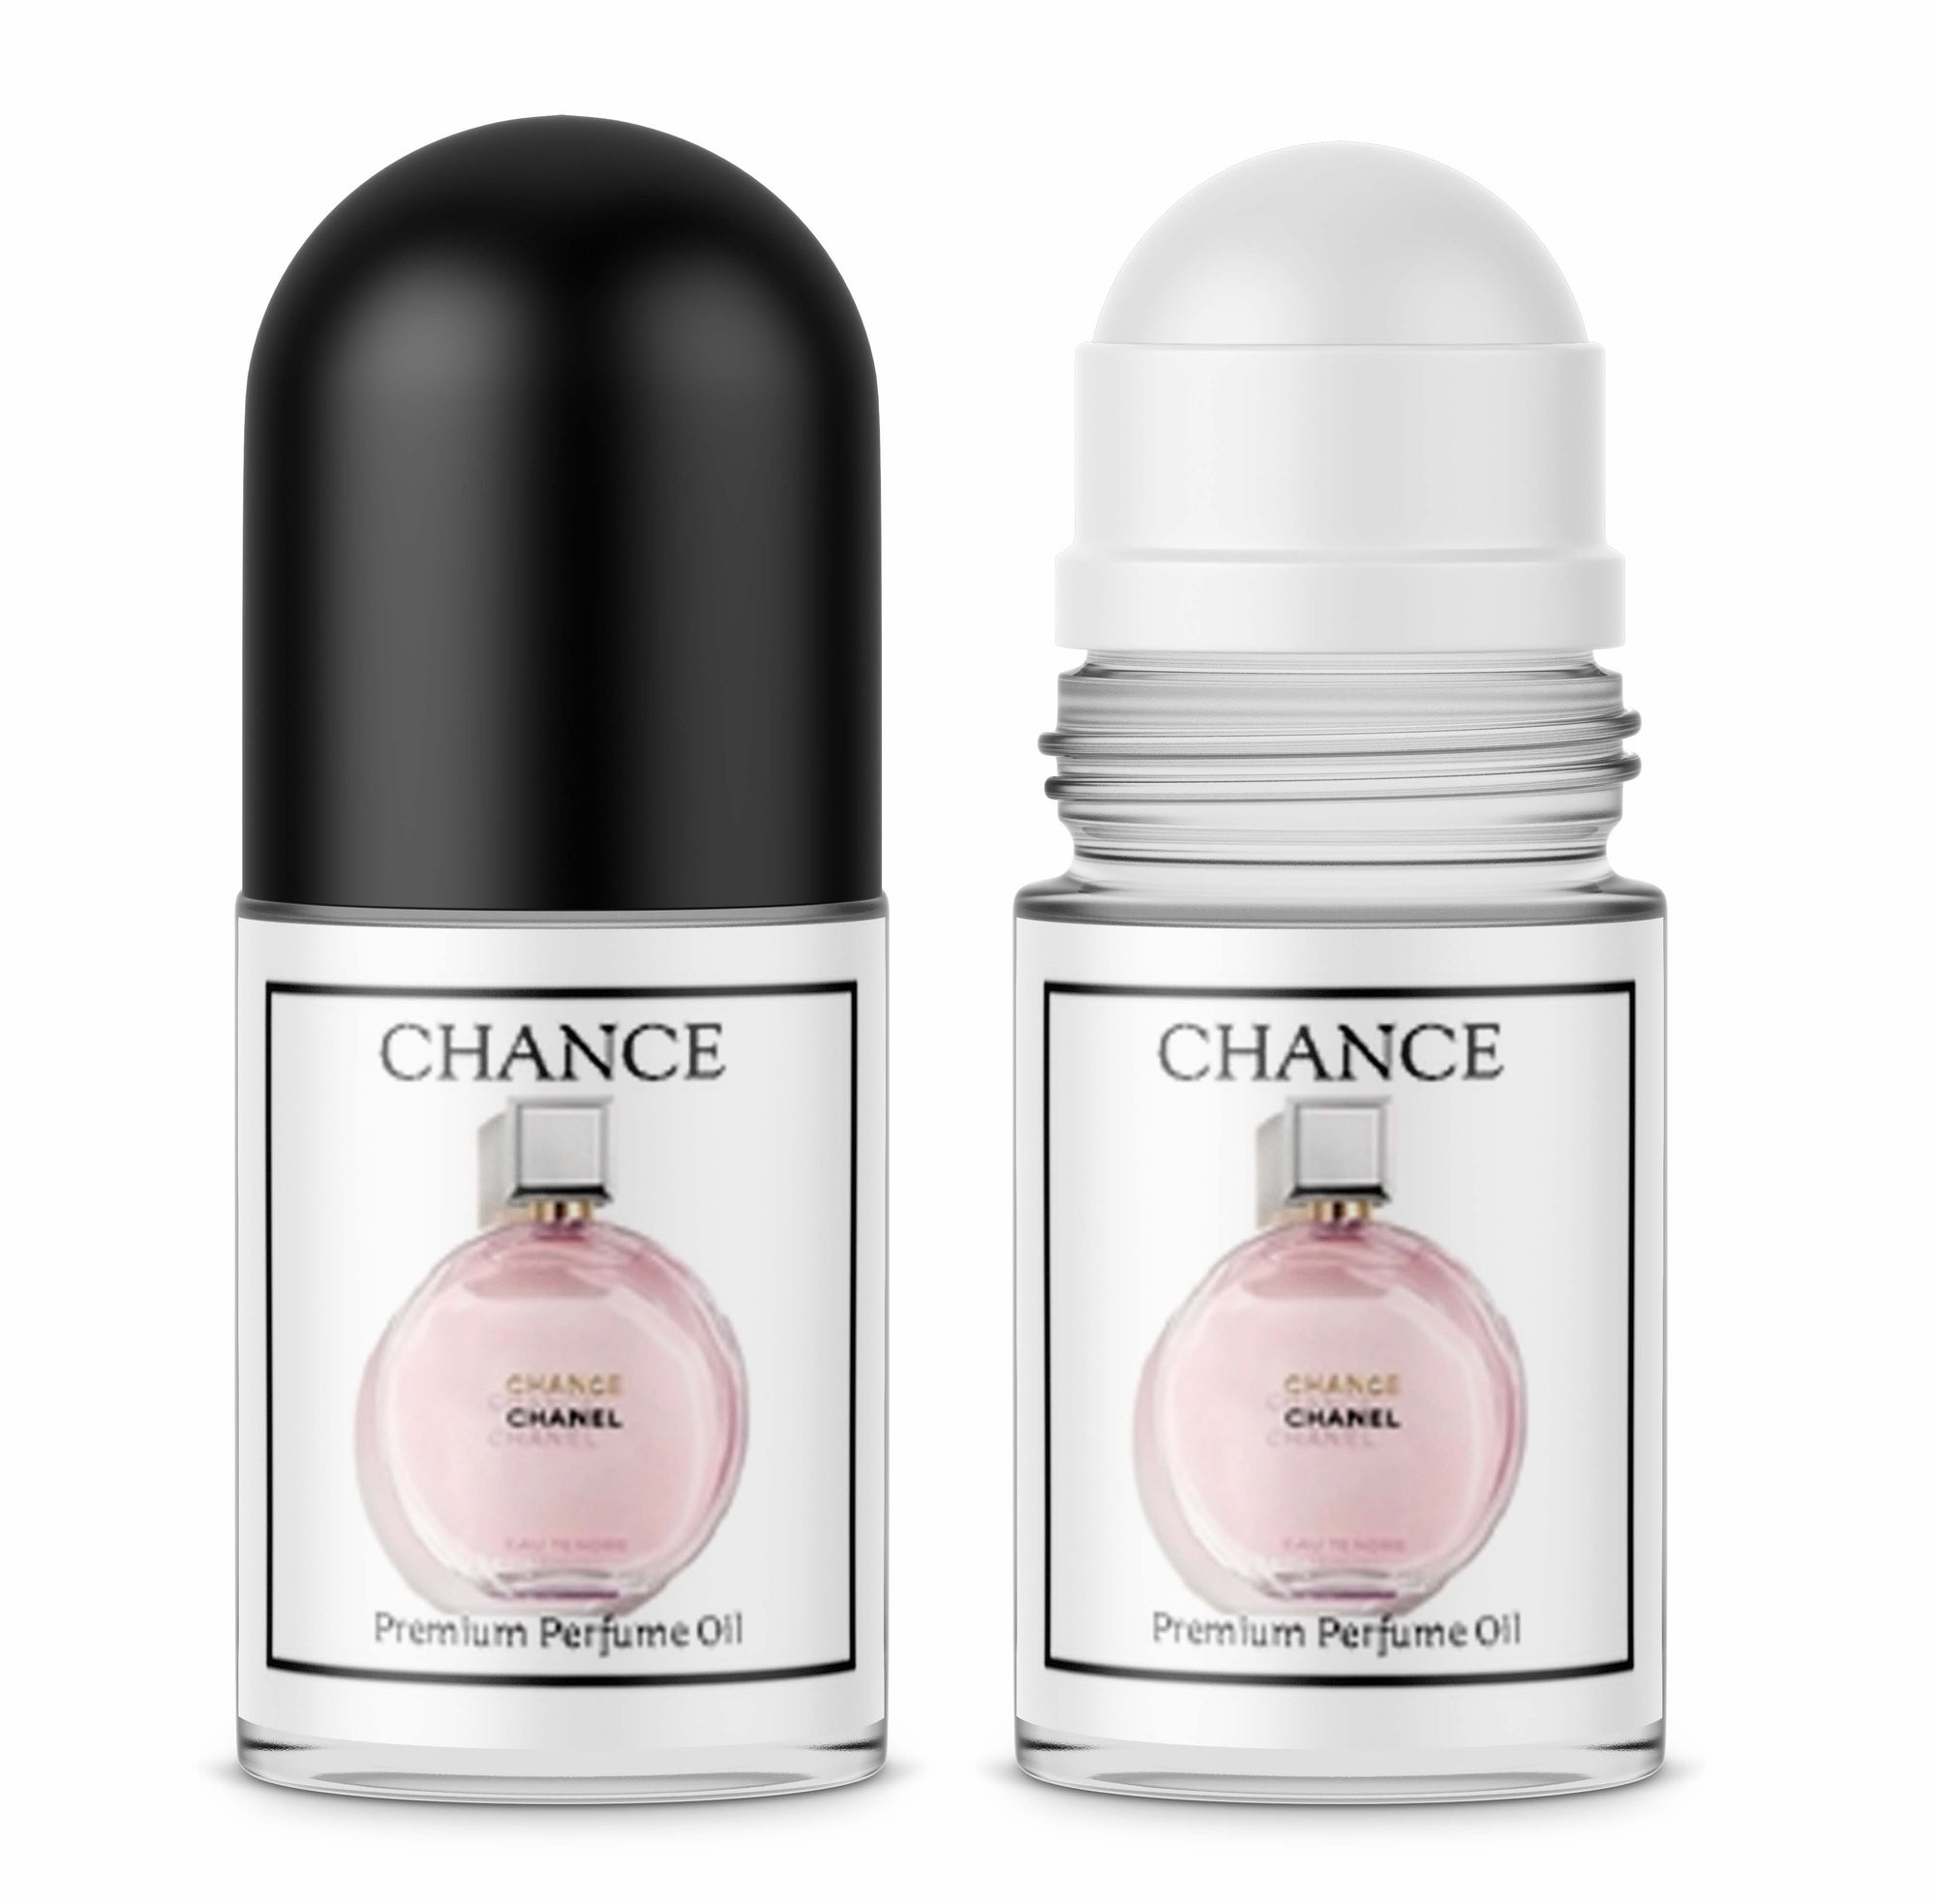 Chanel Chance Roll On Perfume Oil - Natural Sister's / Nature's Lab Store